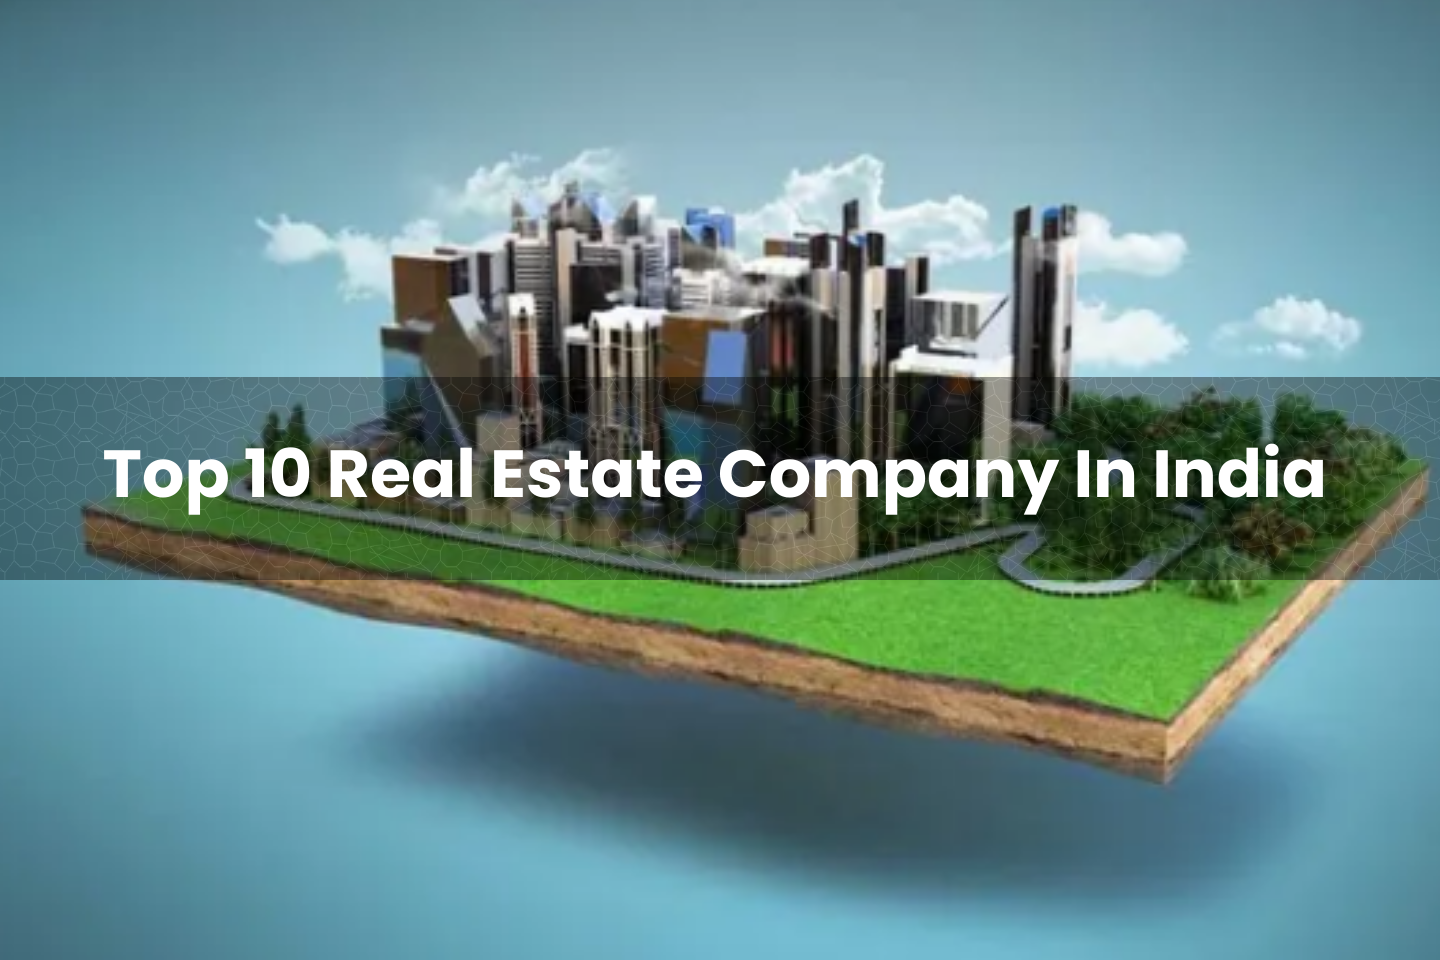 Top 10 Real Estate Company In India